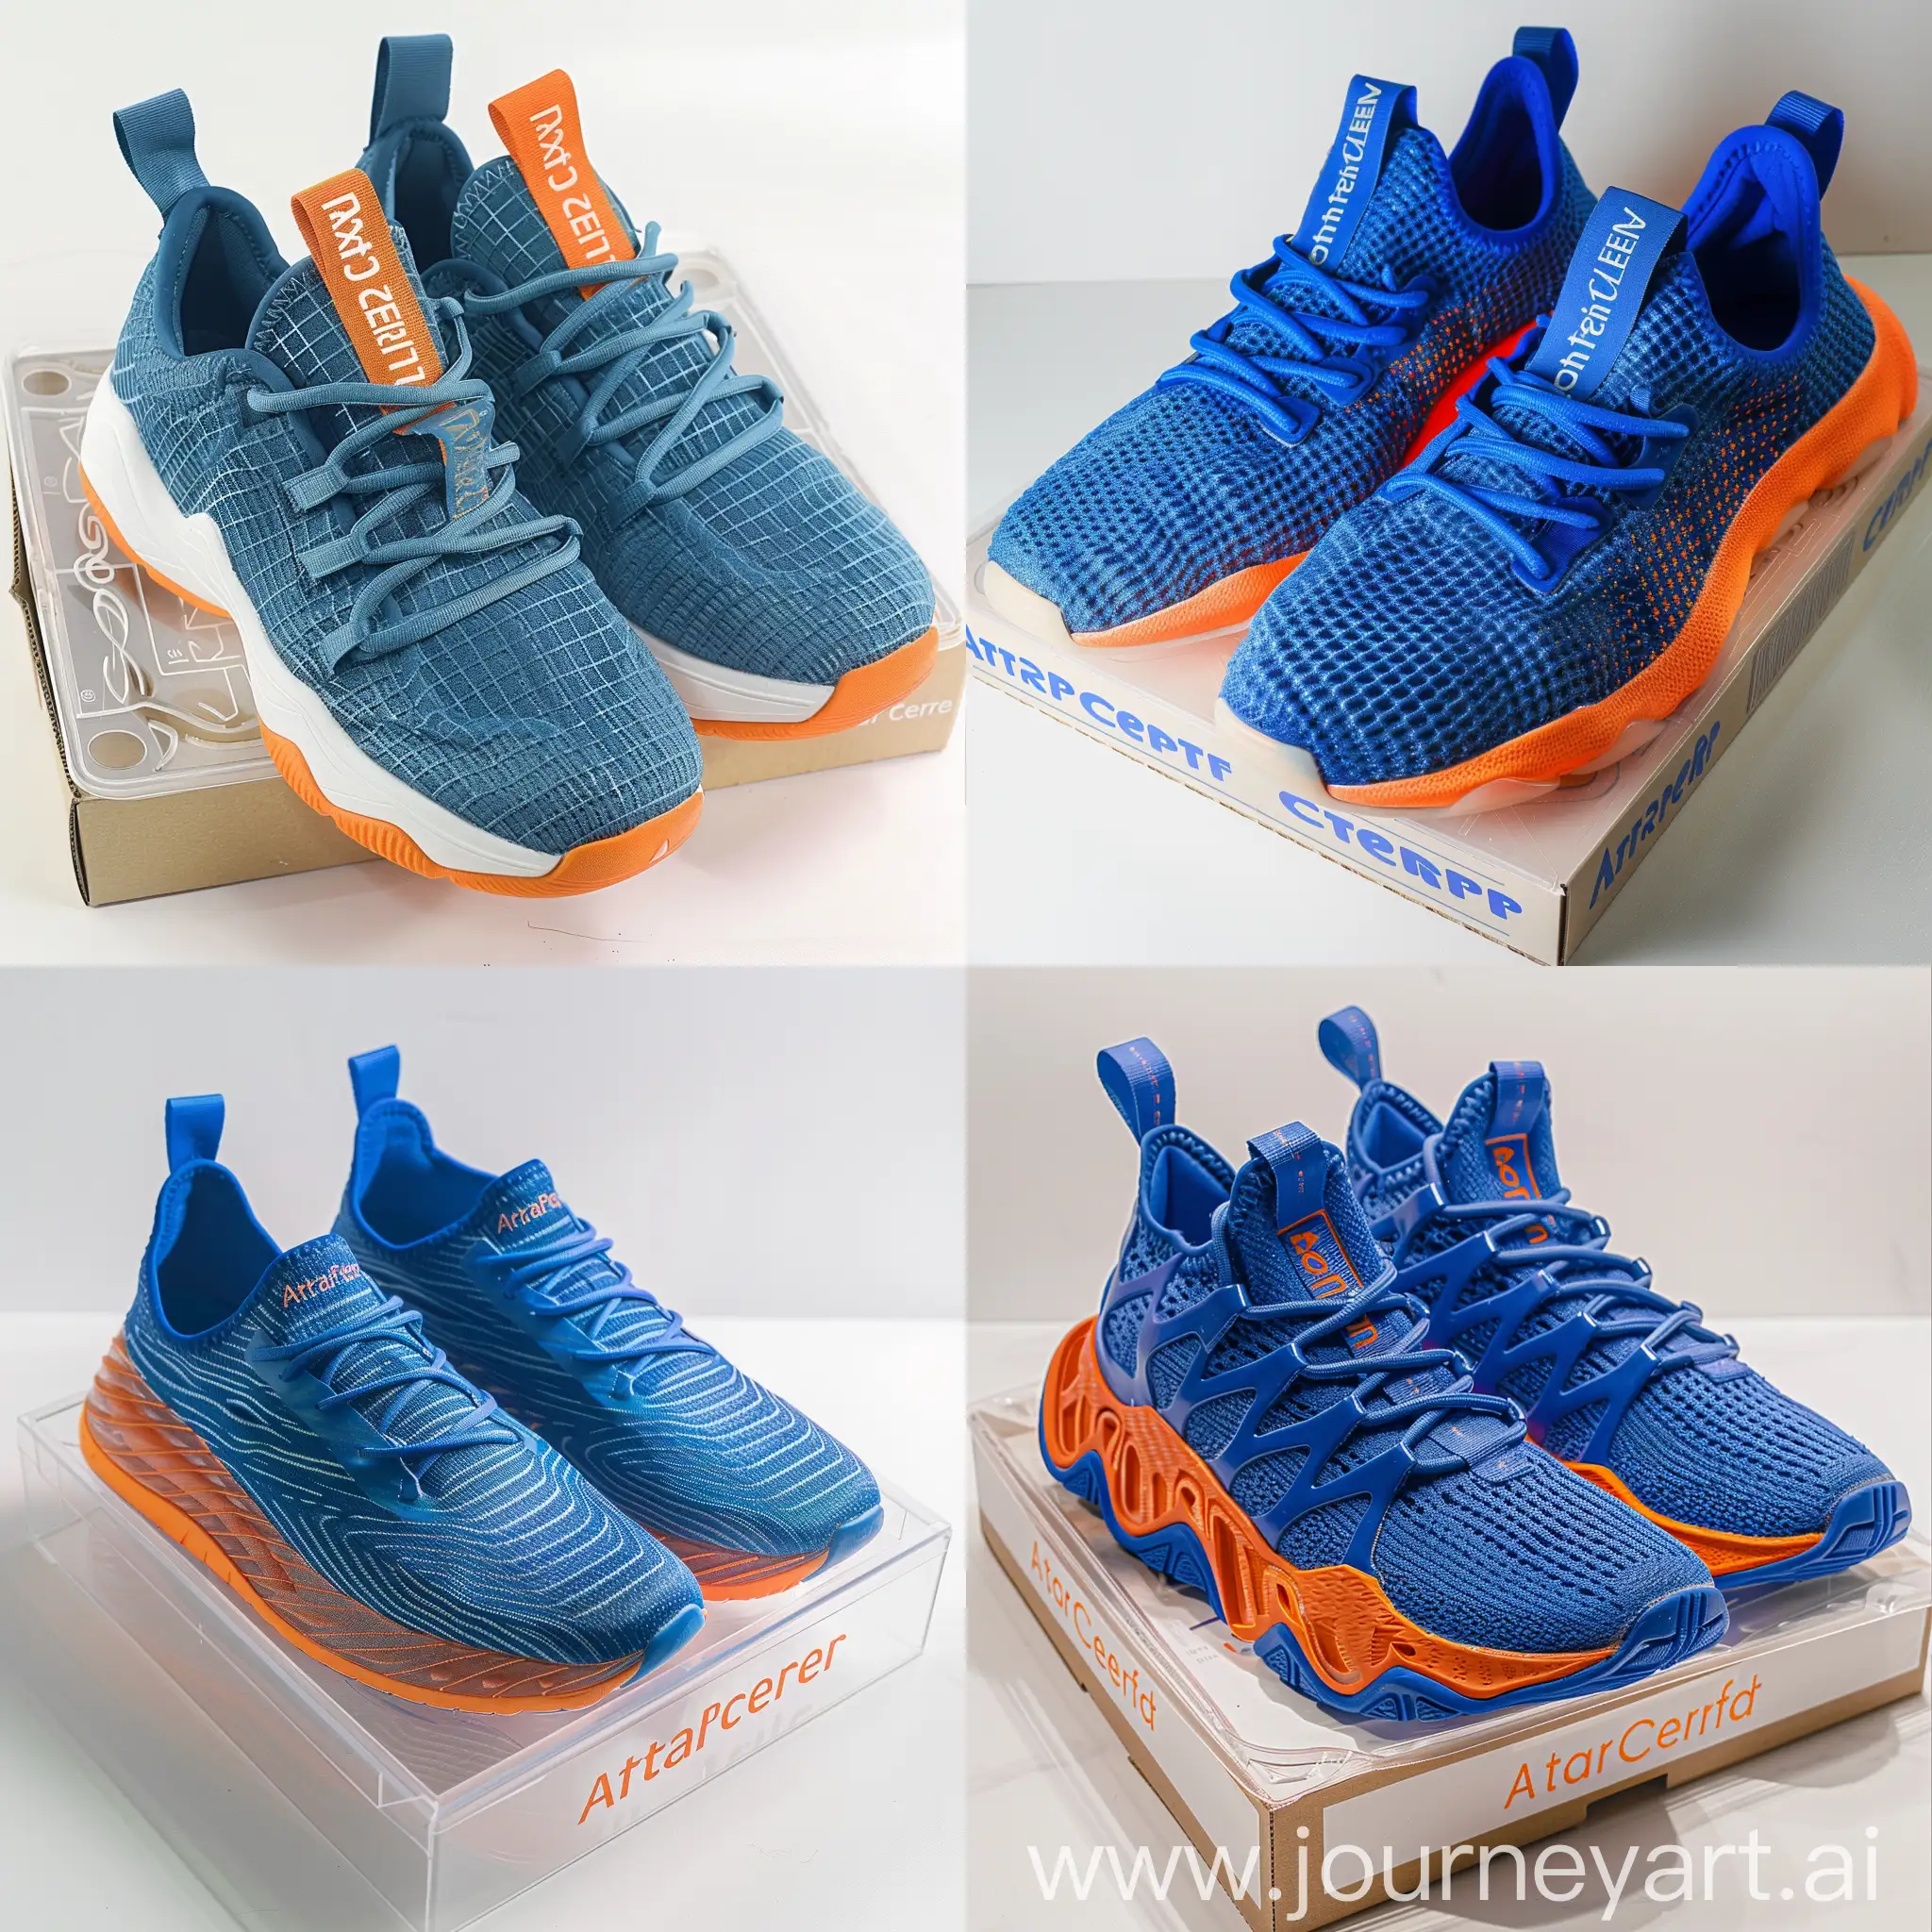 A pair of blue-orange sports shoes with a white background and the brand name of Attar Center engraved on a clear cardboard box.